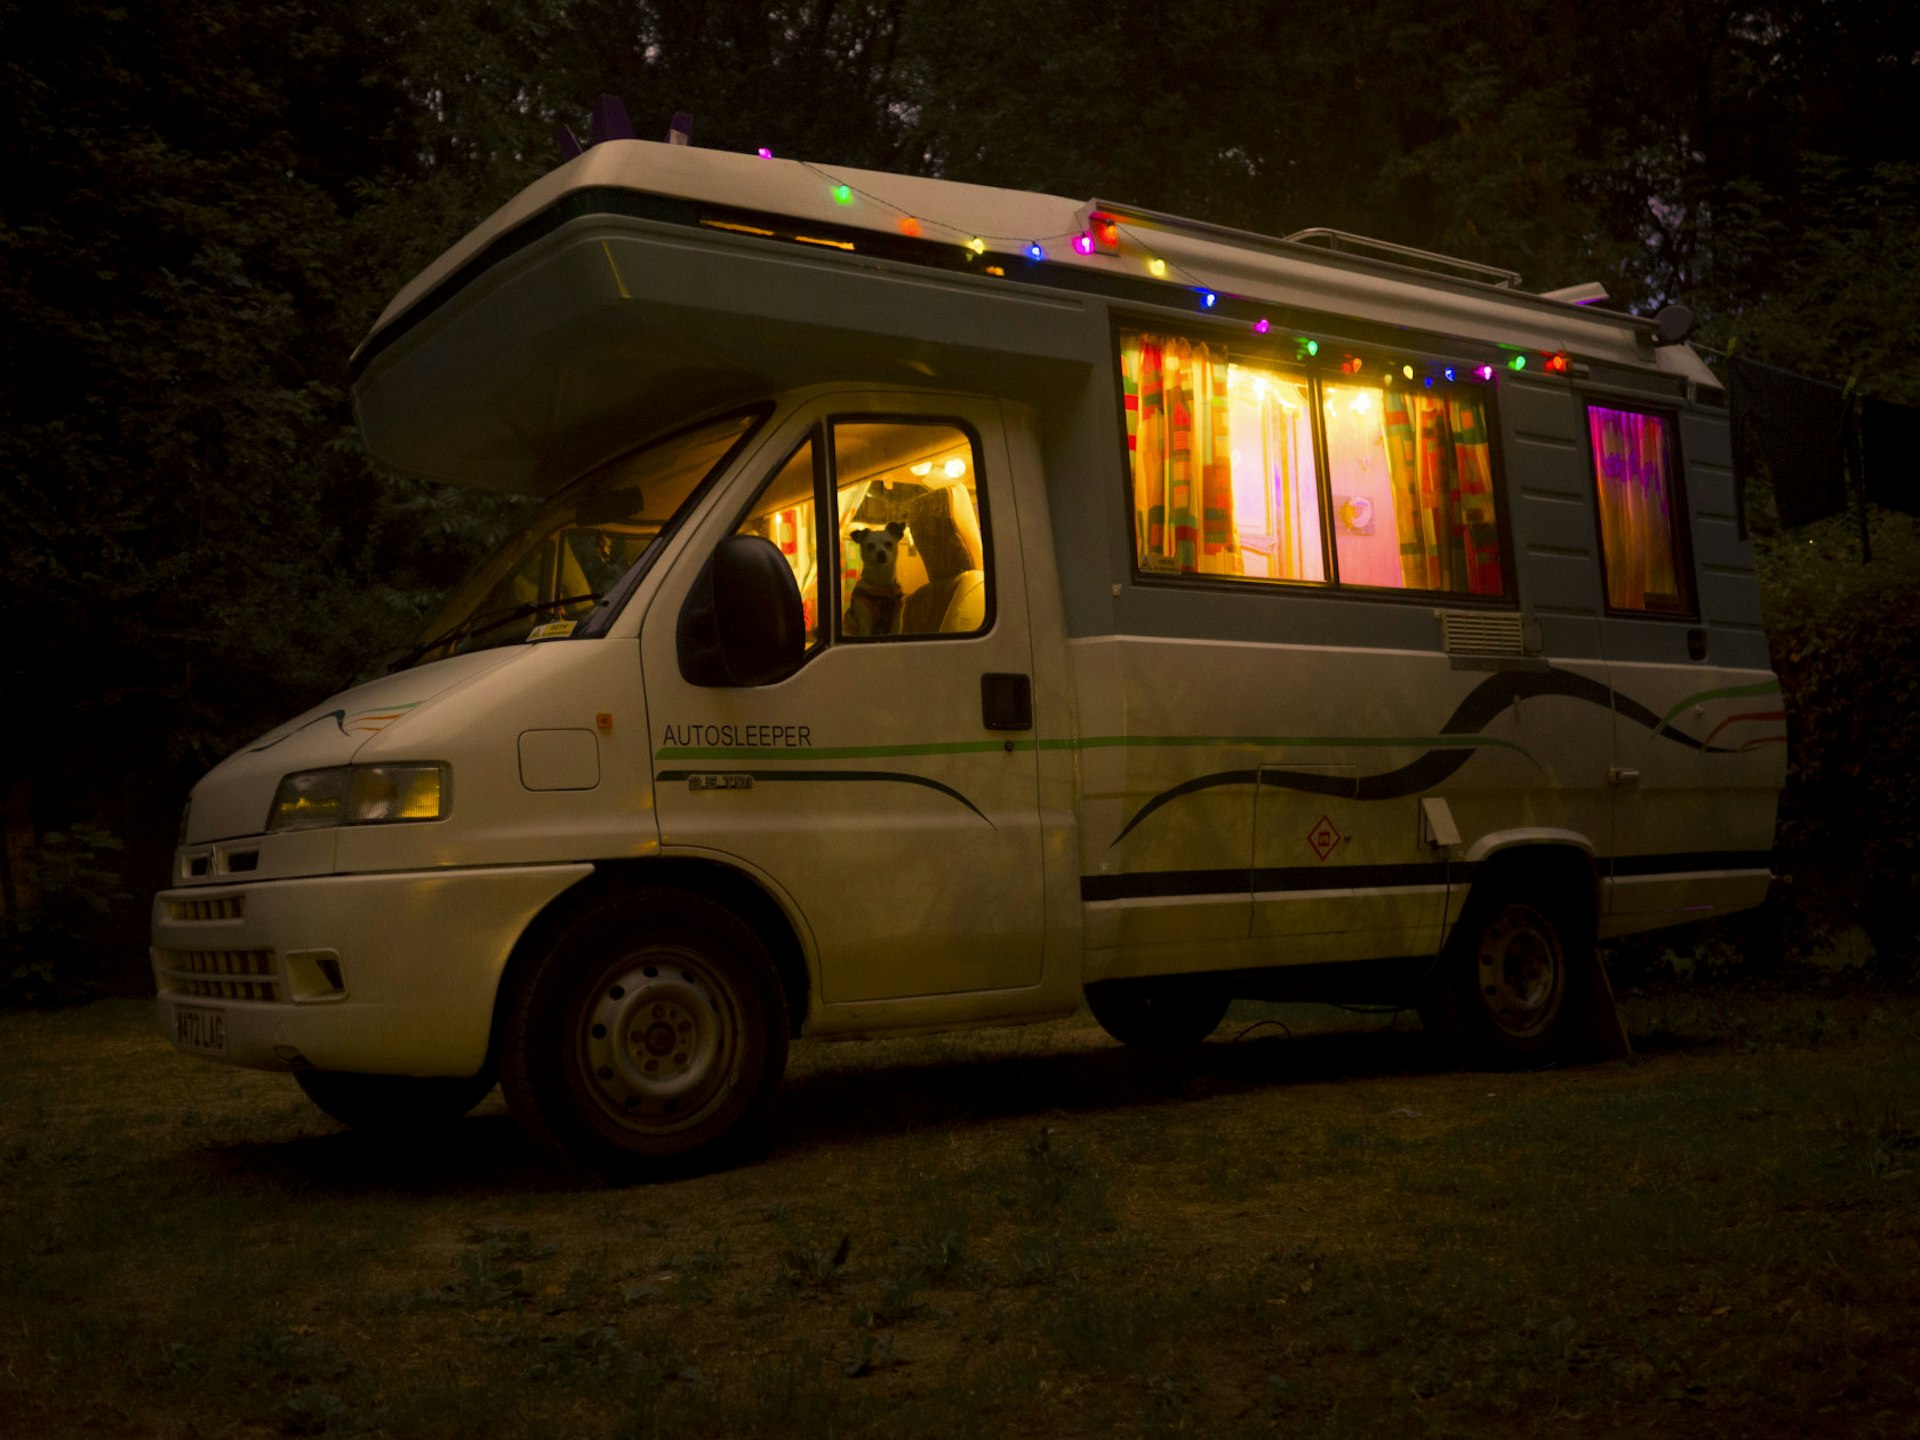 A night photo of a campervan with a dog peaking out the window